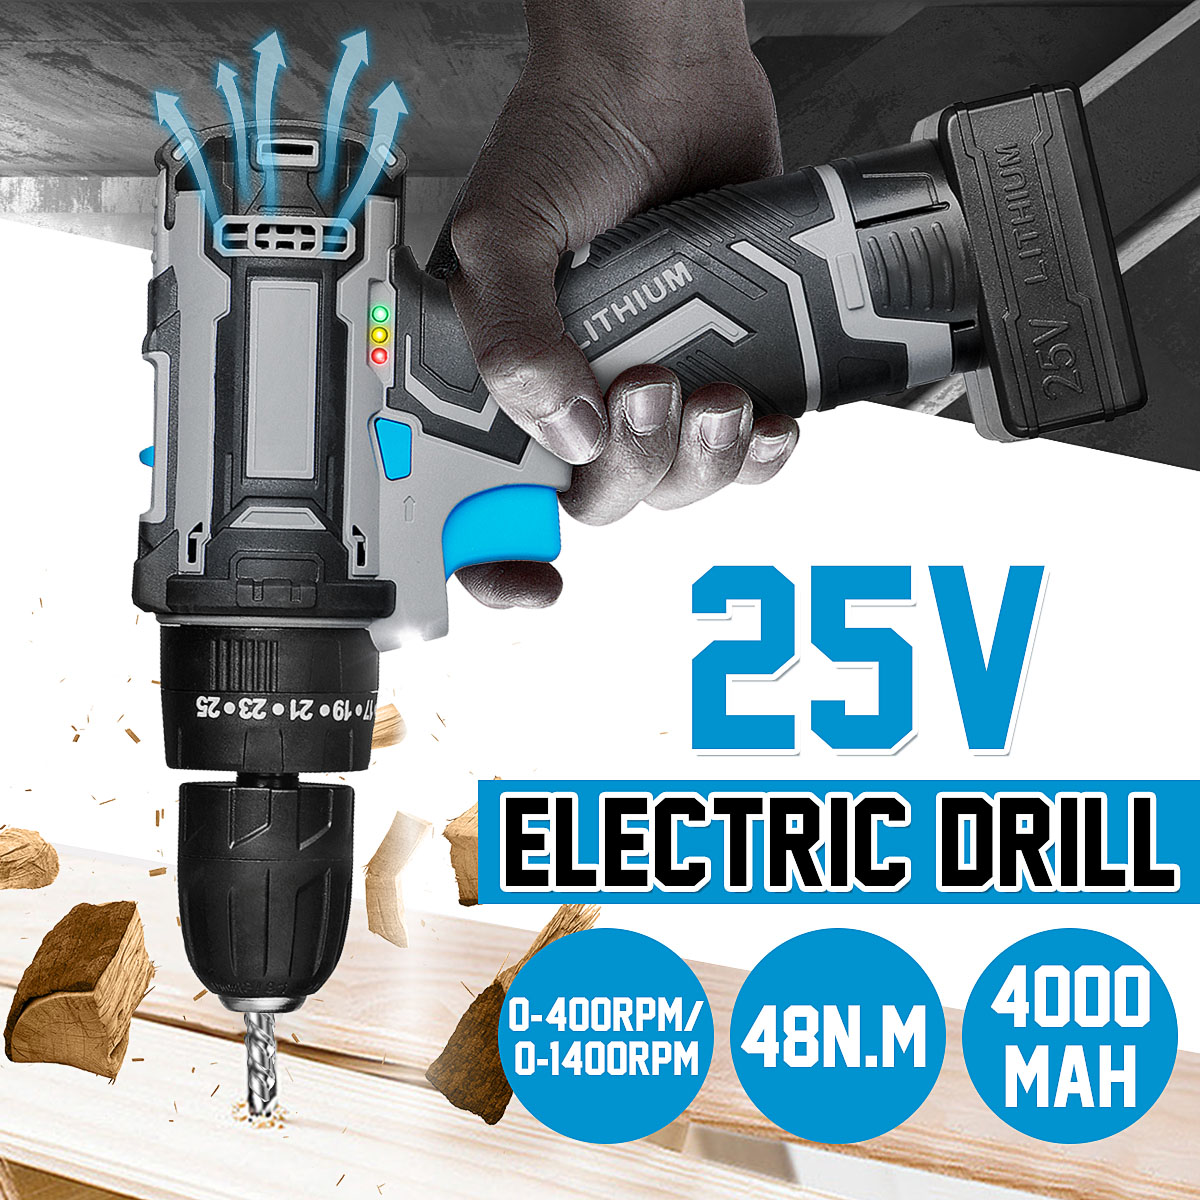 48Nm-25V-Electric-Drill-Cordless-Screwdriver-4000mAh-25-Gears-Household-Power-Tool-W-1pc-Battery-1792576-2